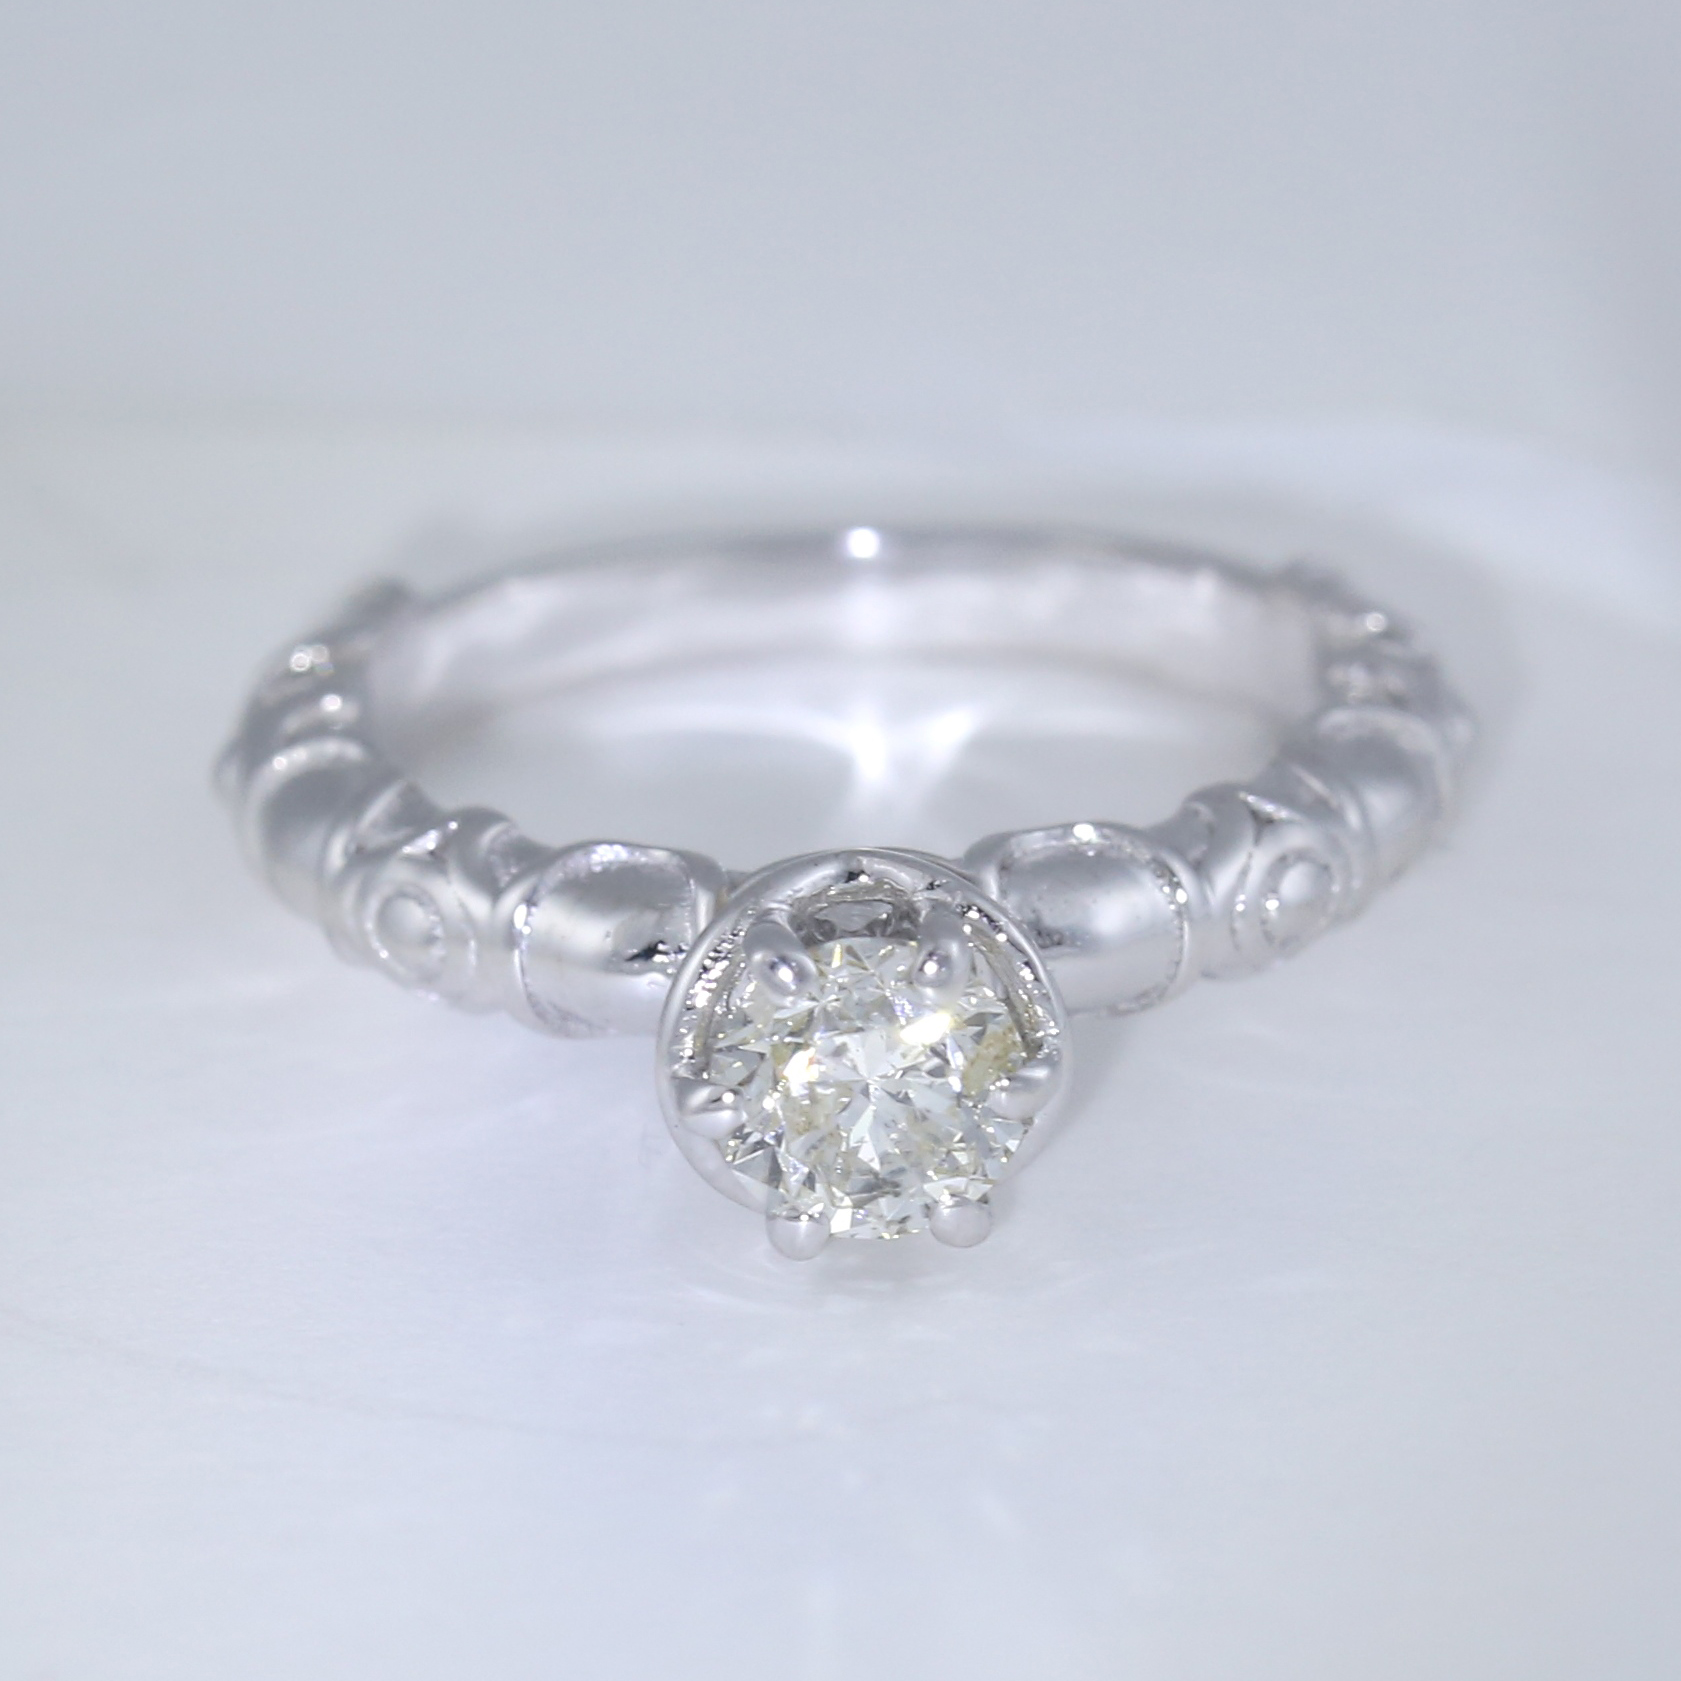 14 K / 585 White Gold Solitaire Diamond Ring - Image 2 of 9